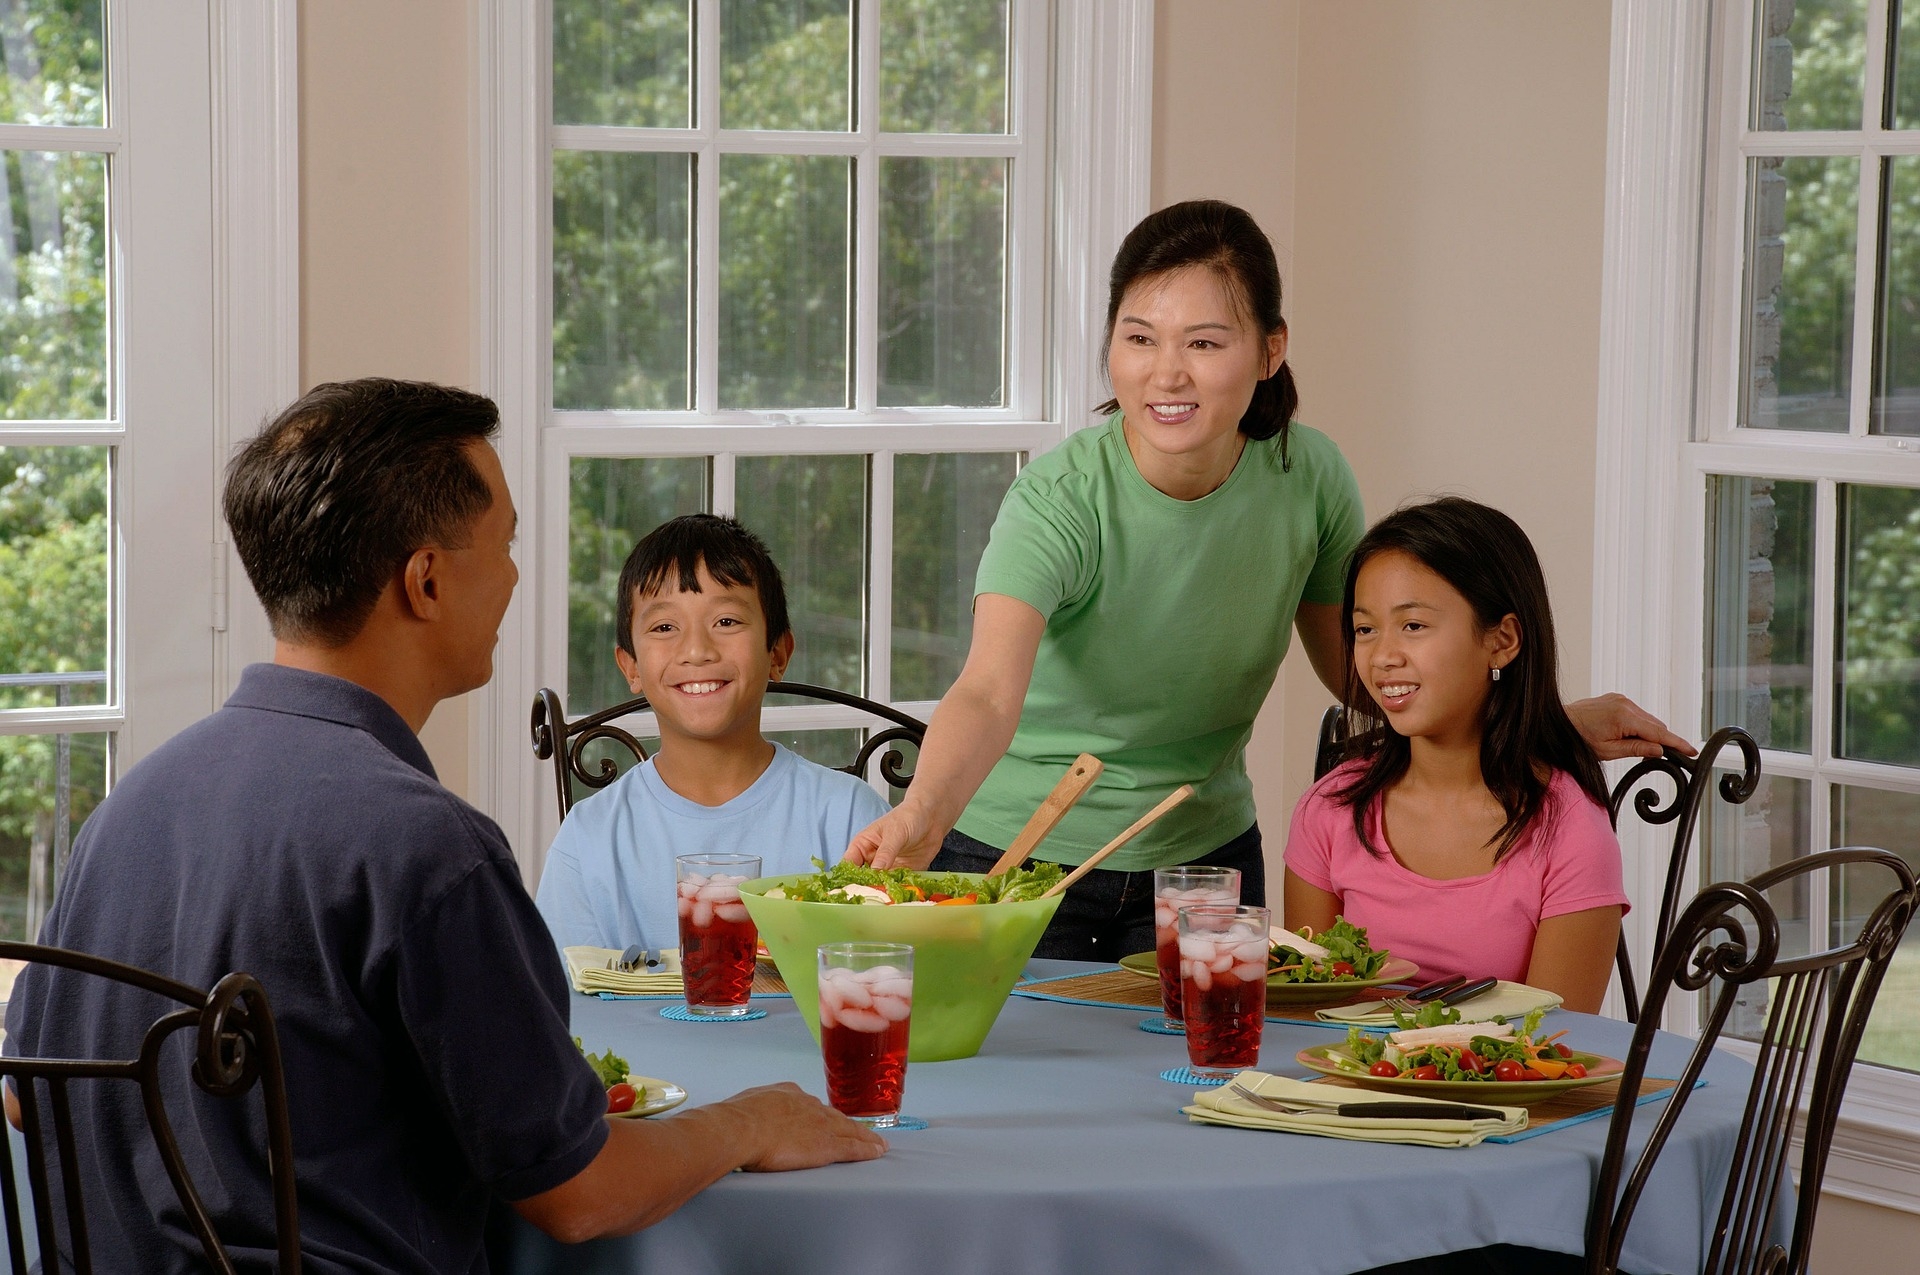 Asianfamily-eating-at-the-table-619142_1920.jpg